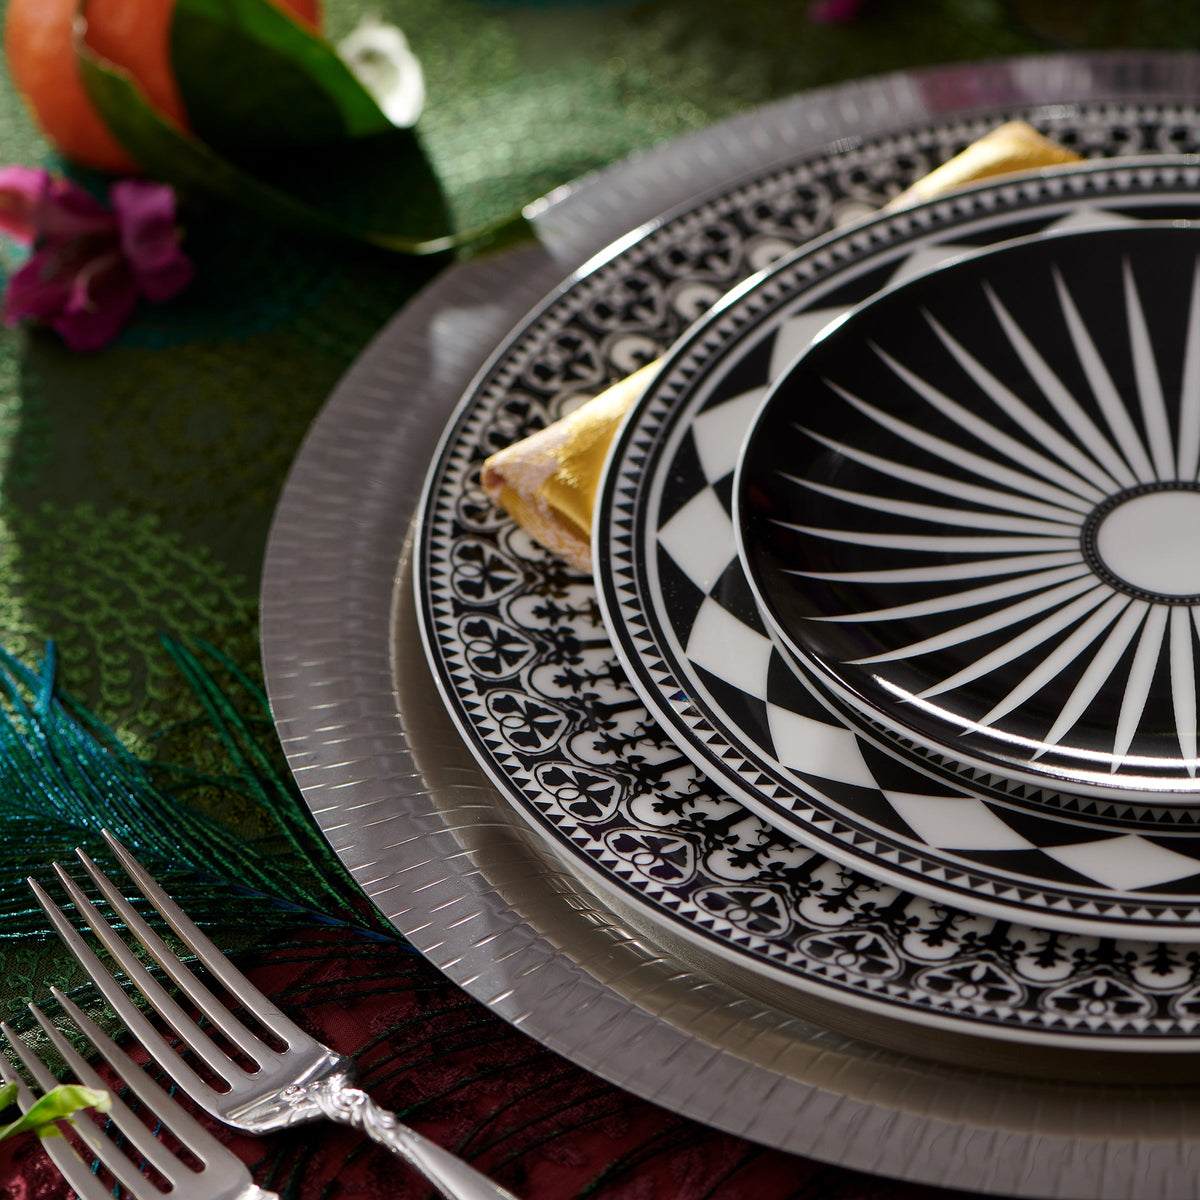 A close-up of a dining table setting featuring ornate black and white geometric pattern plates, specifically the Fez Rimmed Salad Plate by Caskata Artisanal Home, a silver charger, and silverware. The sophisticated global feel is accentuated by a decorative peacock feather and flowers nearby, perfectly complementing the bold geometrics.